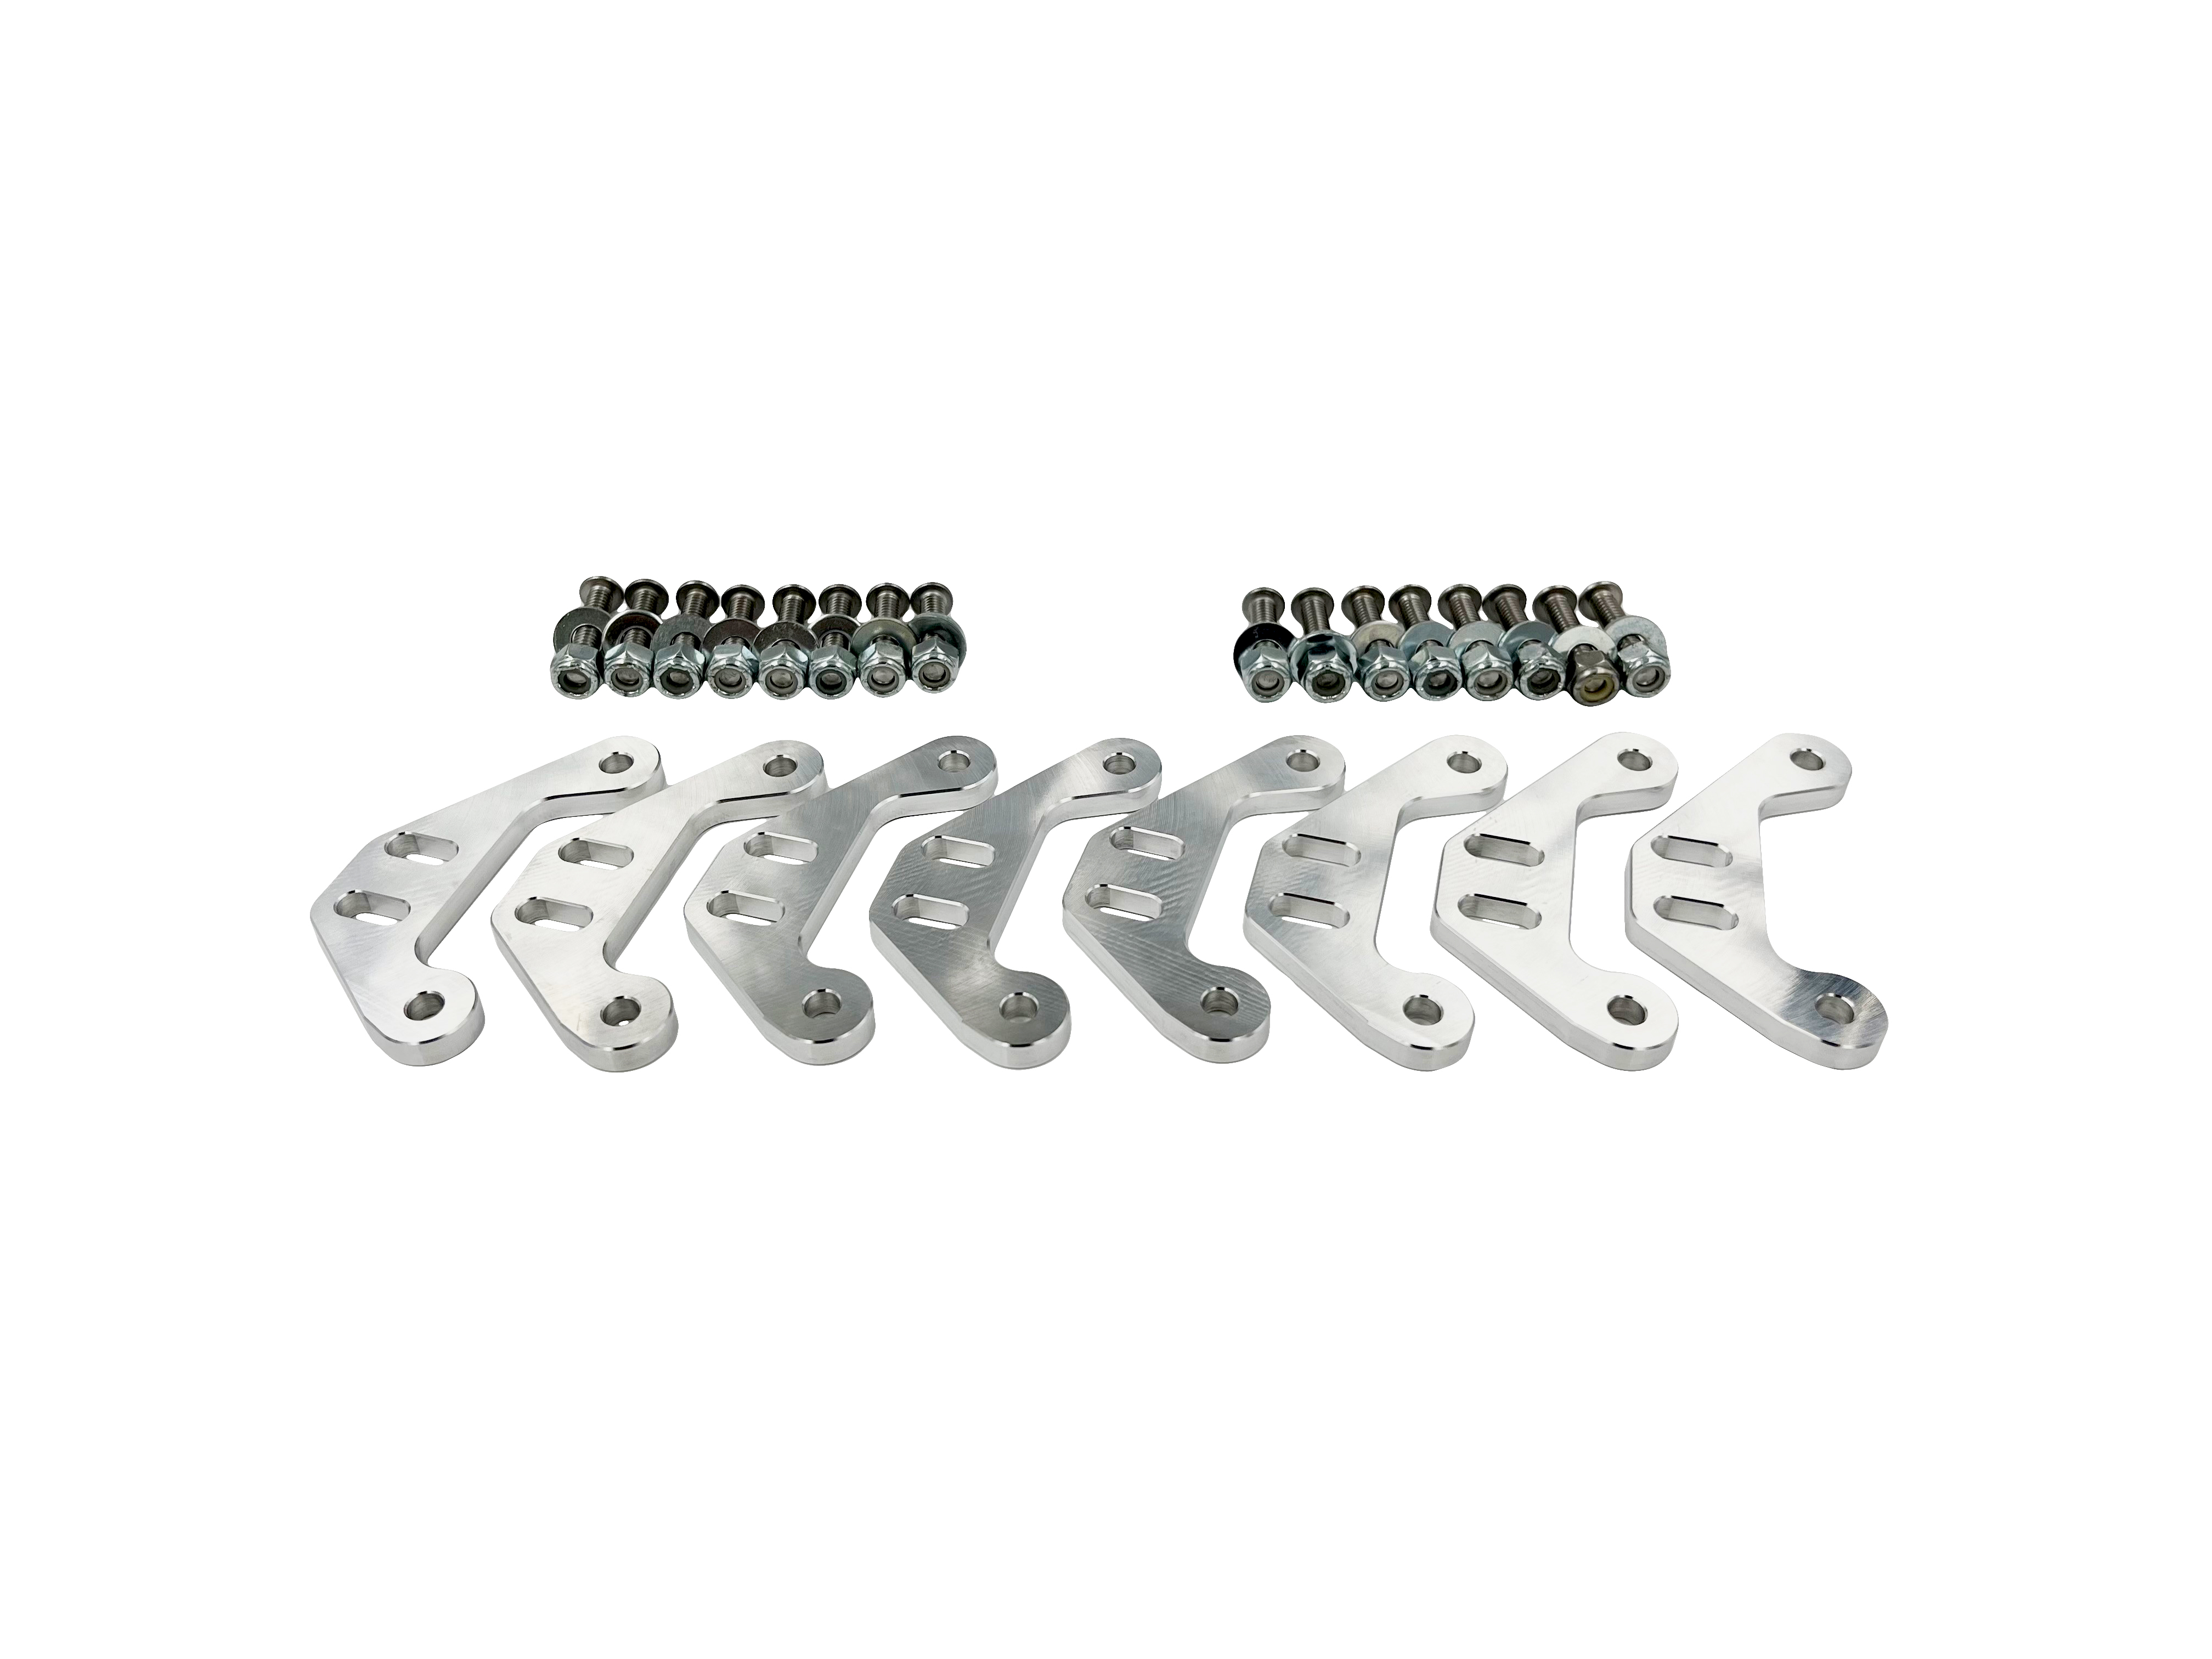 GM LS3 Coil Adapters